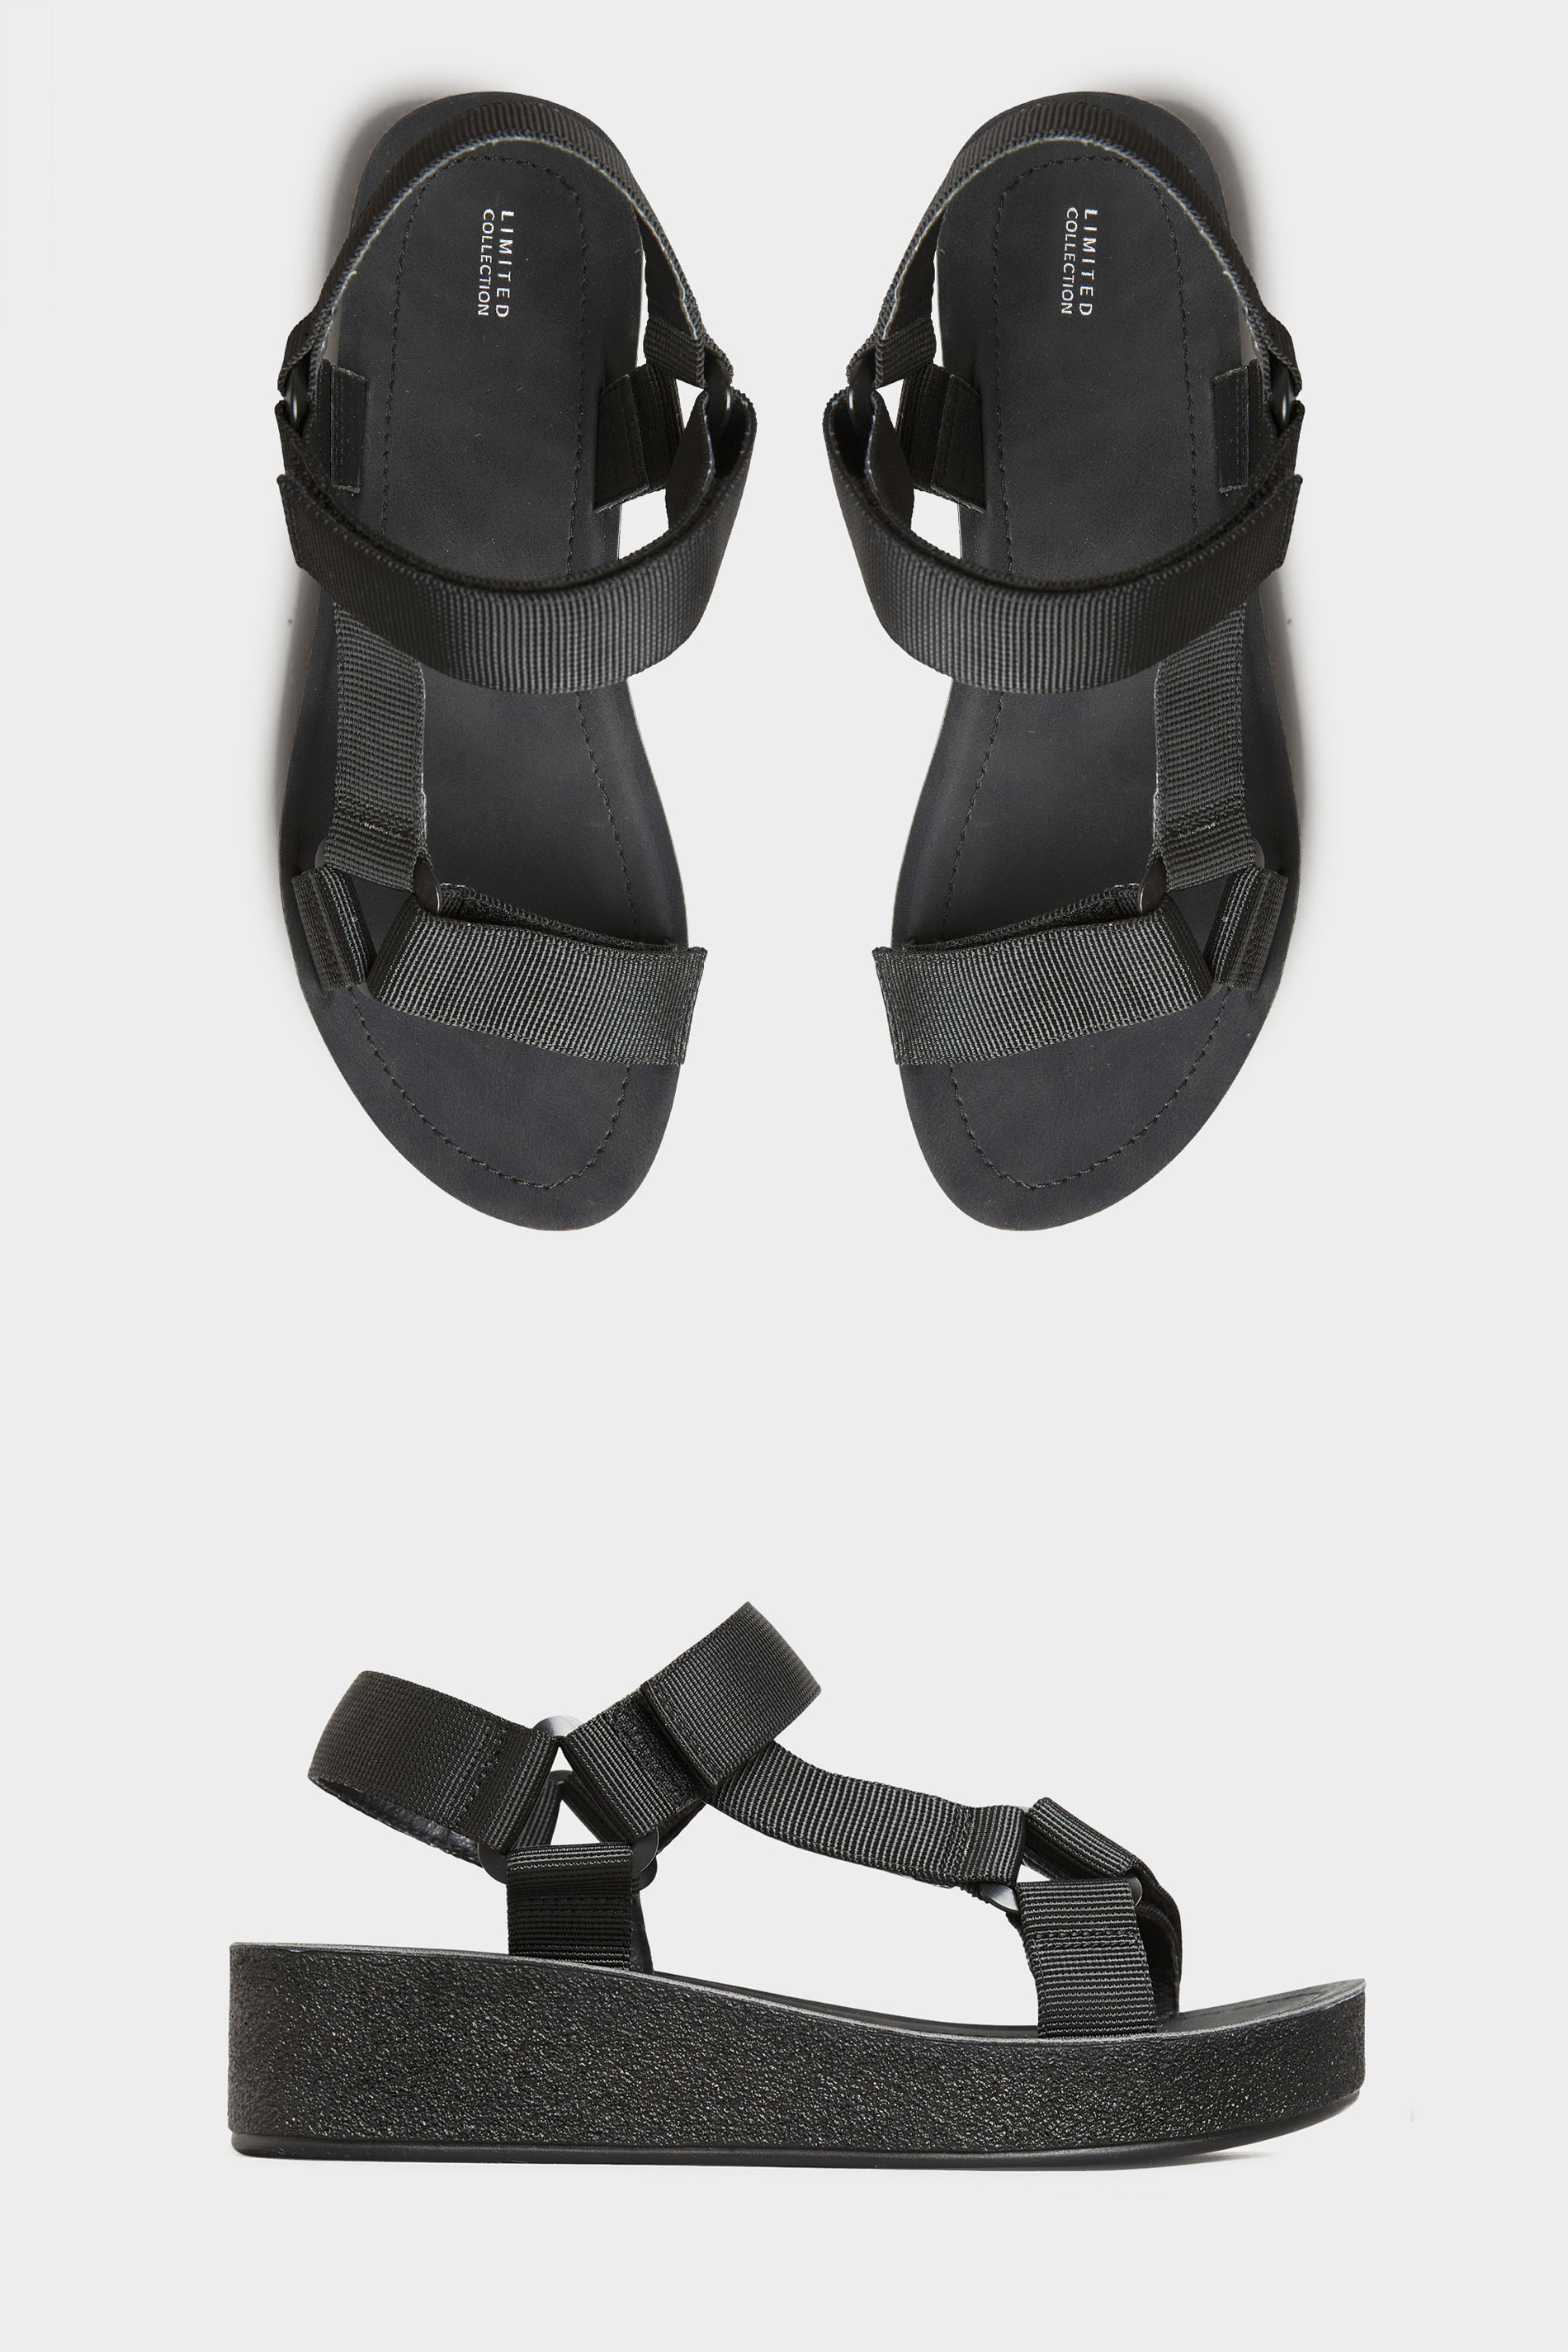 LIMITED COLLECTION Black Sporty Mid Platform Sandals In Extra Wide Fit | Yours Clothing 2